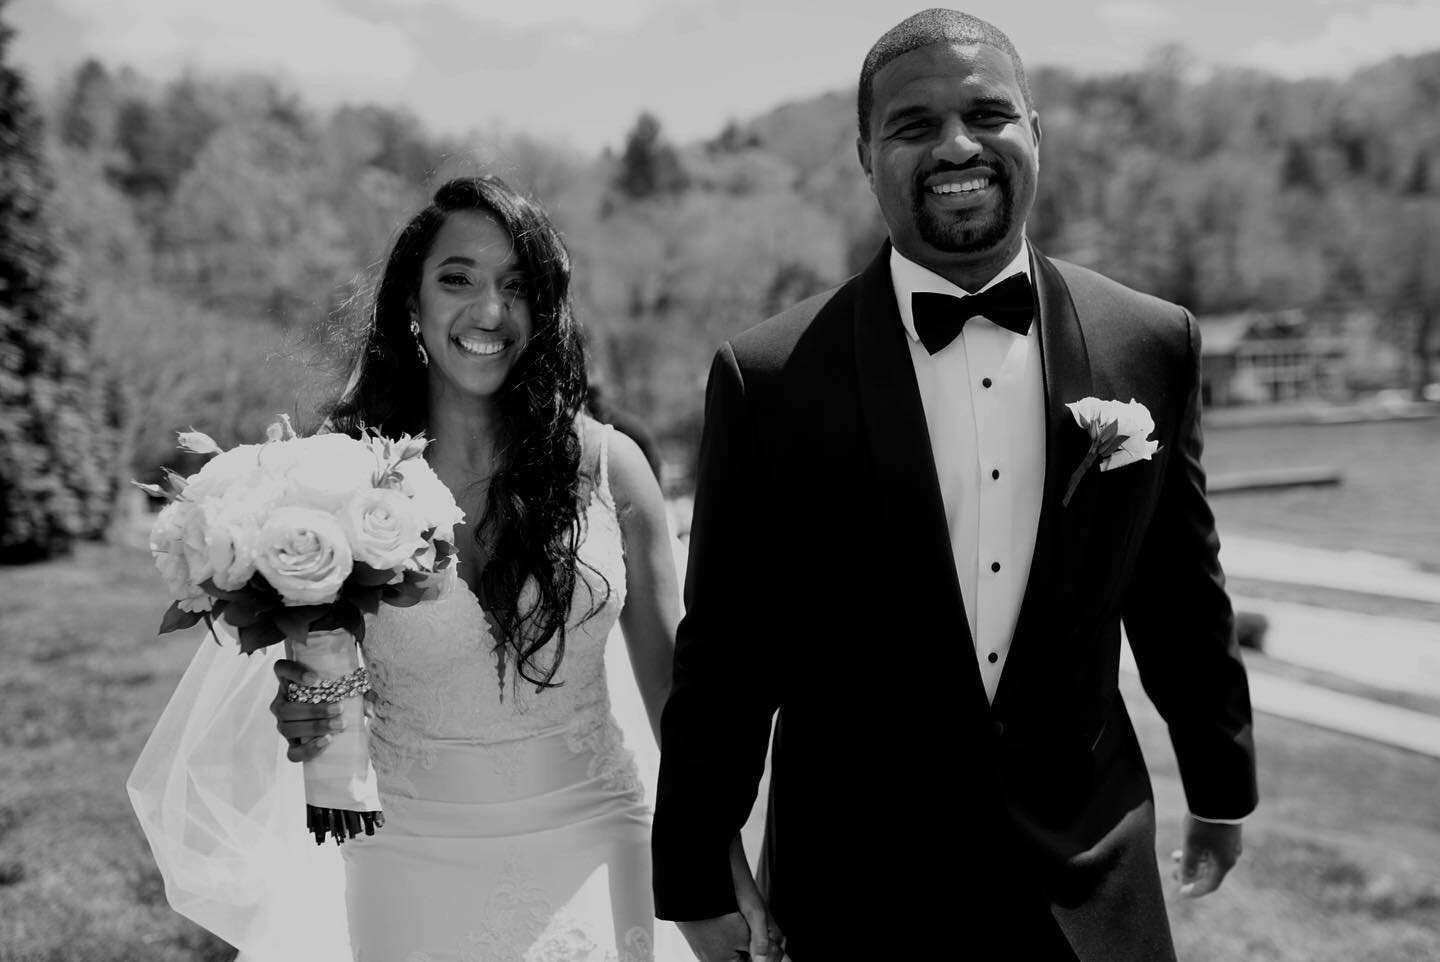 @artgoodsoniii Walk in confidence knowing that the woman next to you is in awe of the man God created you to be. 

Congrats to these two love birds!! It was truly an honor to capture their love &amp; joy on their wedding day. 

I have known Art for m